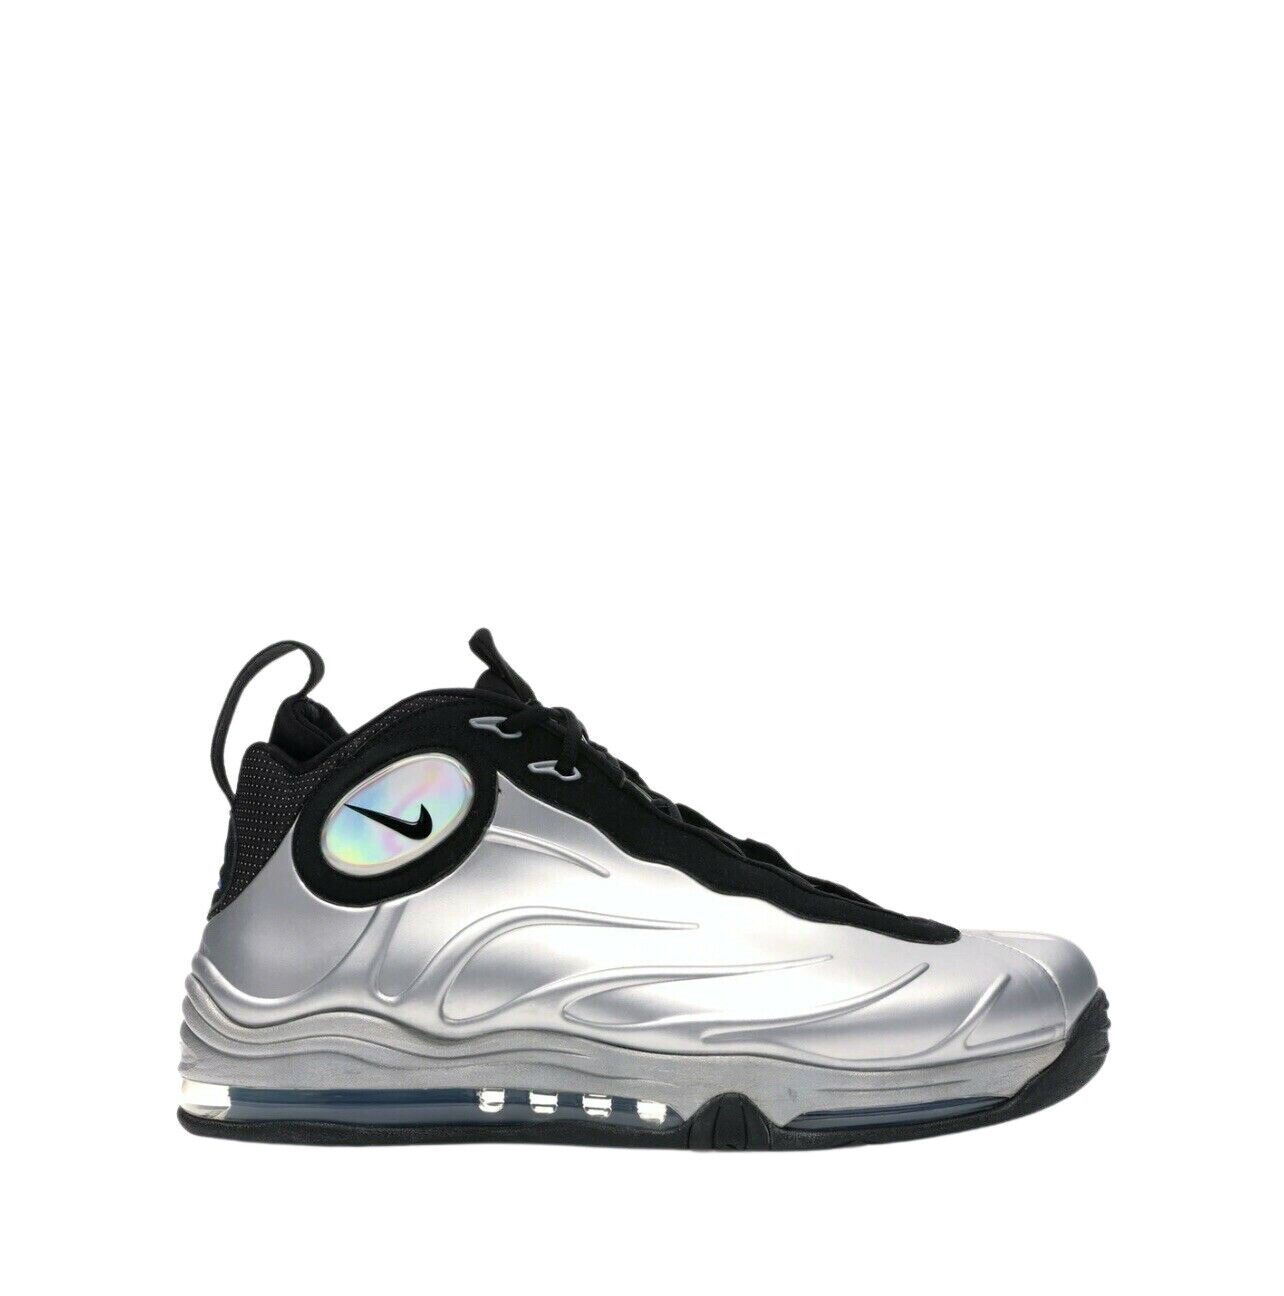 Dictate spring Bot Size 11 - Nike Total Air Foamposite Max Metallic Silver 2011 for sale  online | eBay